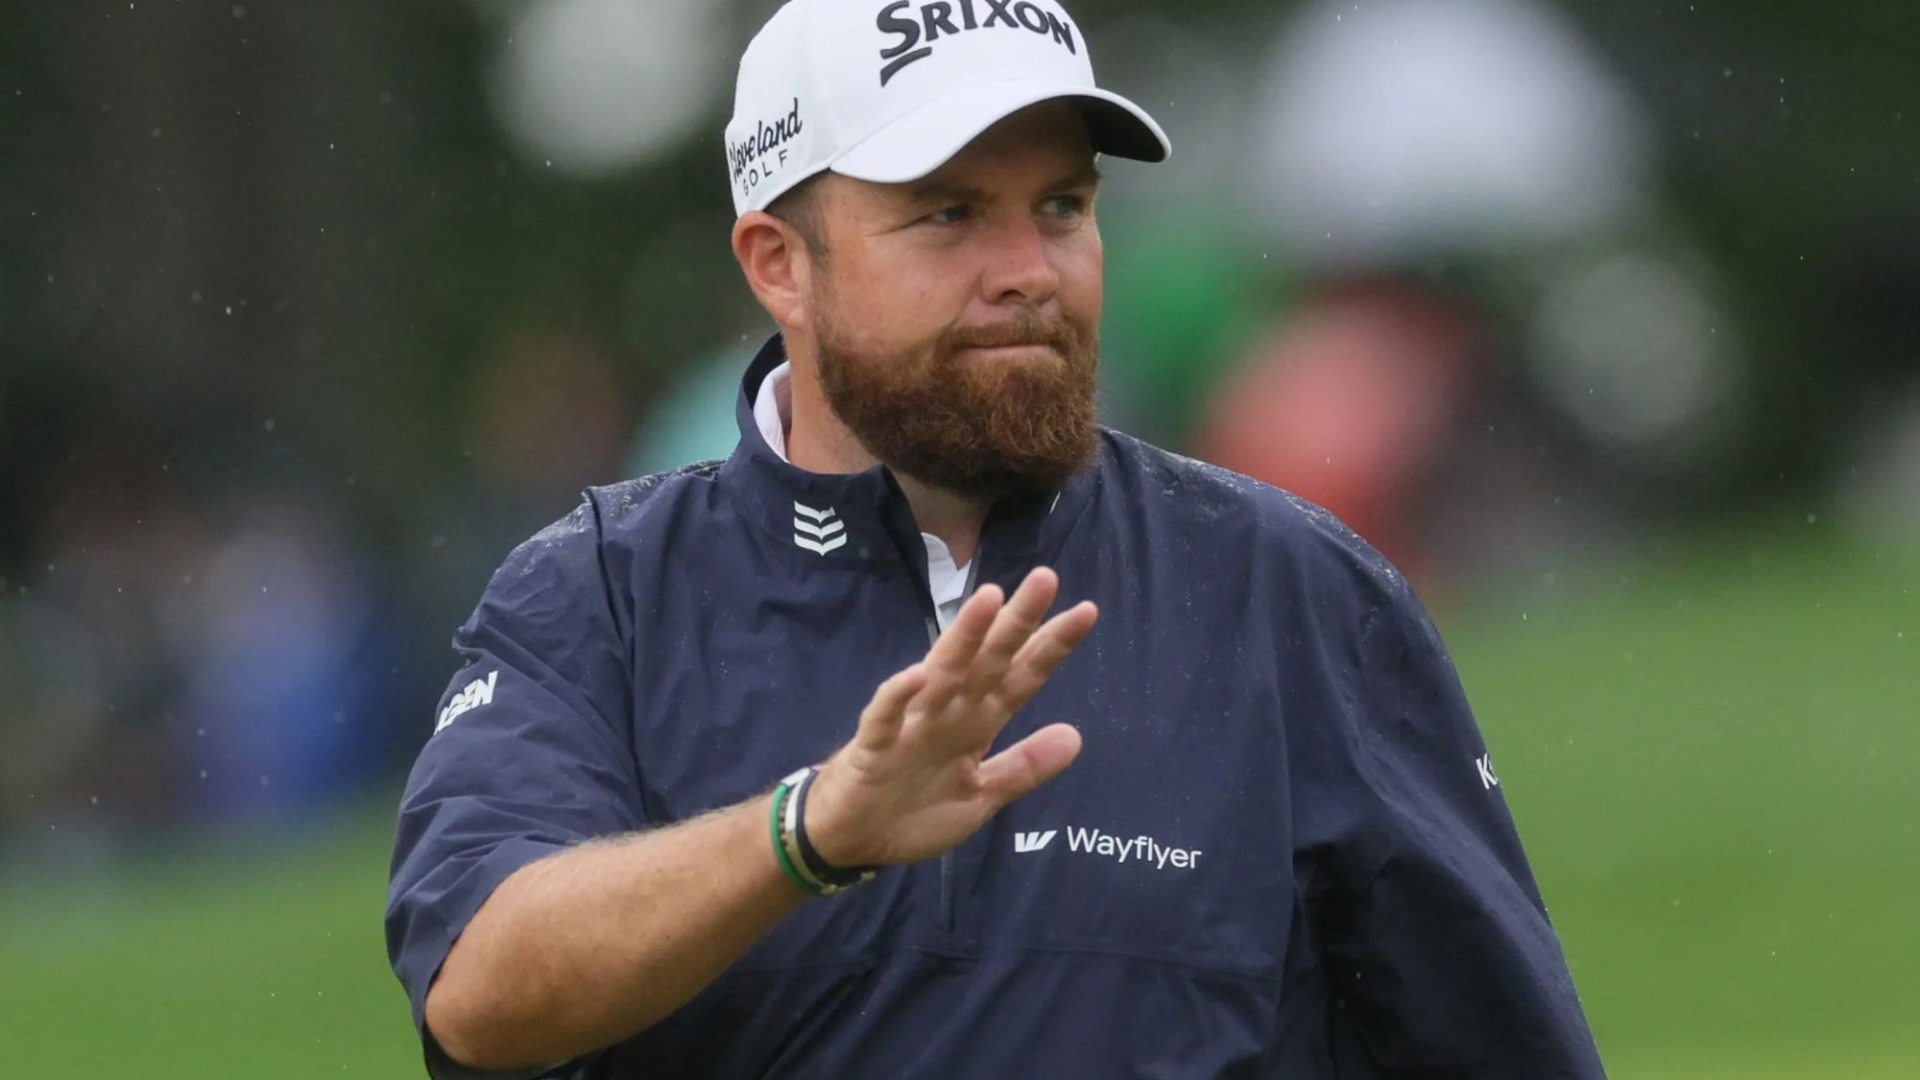 Shane Lowry makes emotional tribute to volunteer killed at Valhalla before detailing ‘eerie’ day at USPGA Championship [Video]